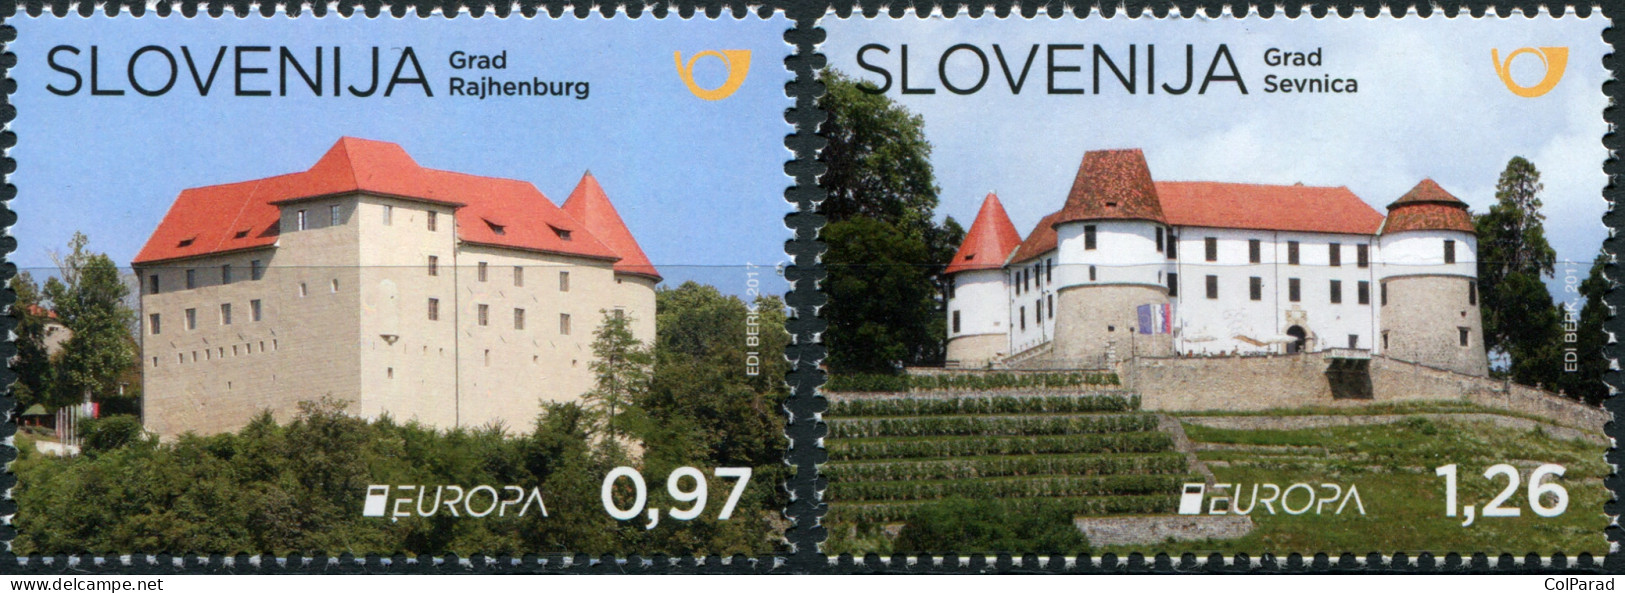 SLOVENIA - 2017 - SET OF 2 STAMPS MNH ** - EUROPA Stamps - Palaces And Castles - Slovenië